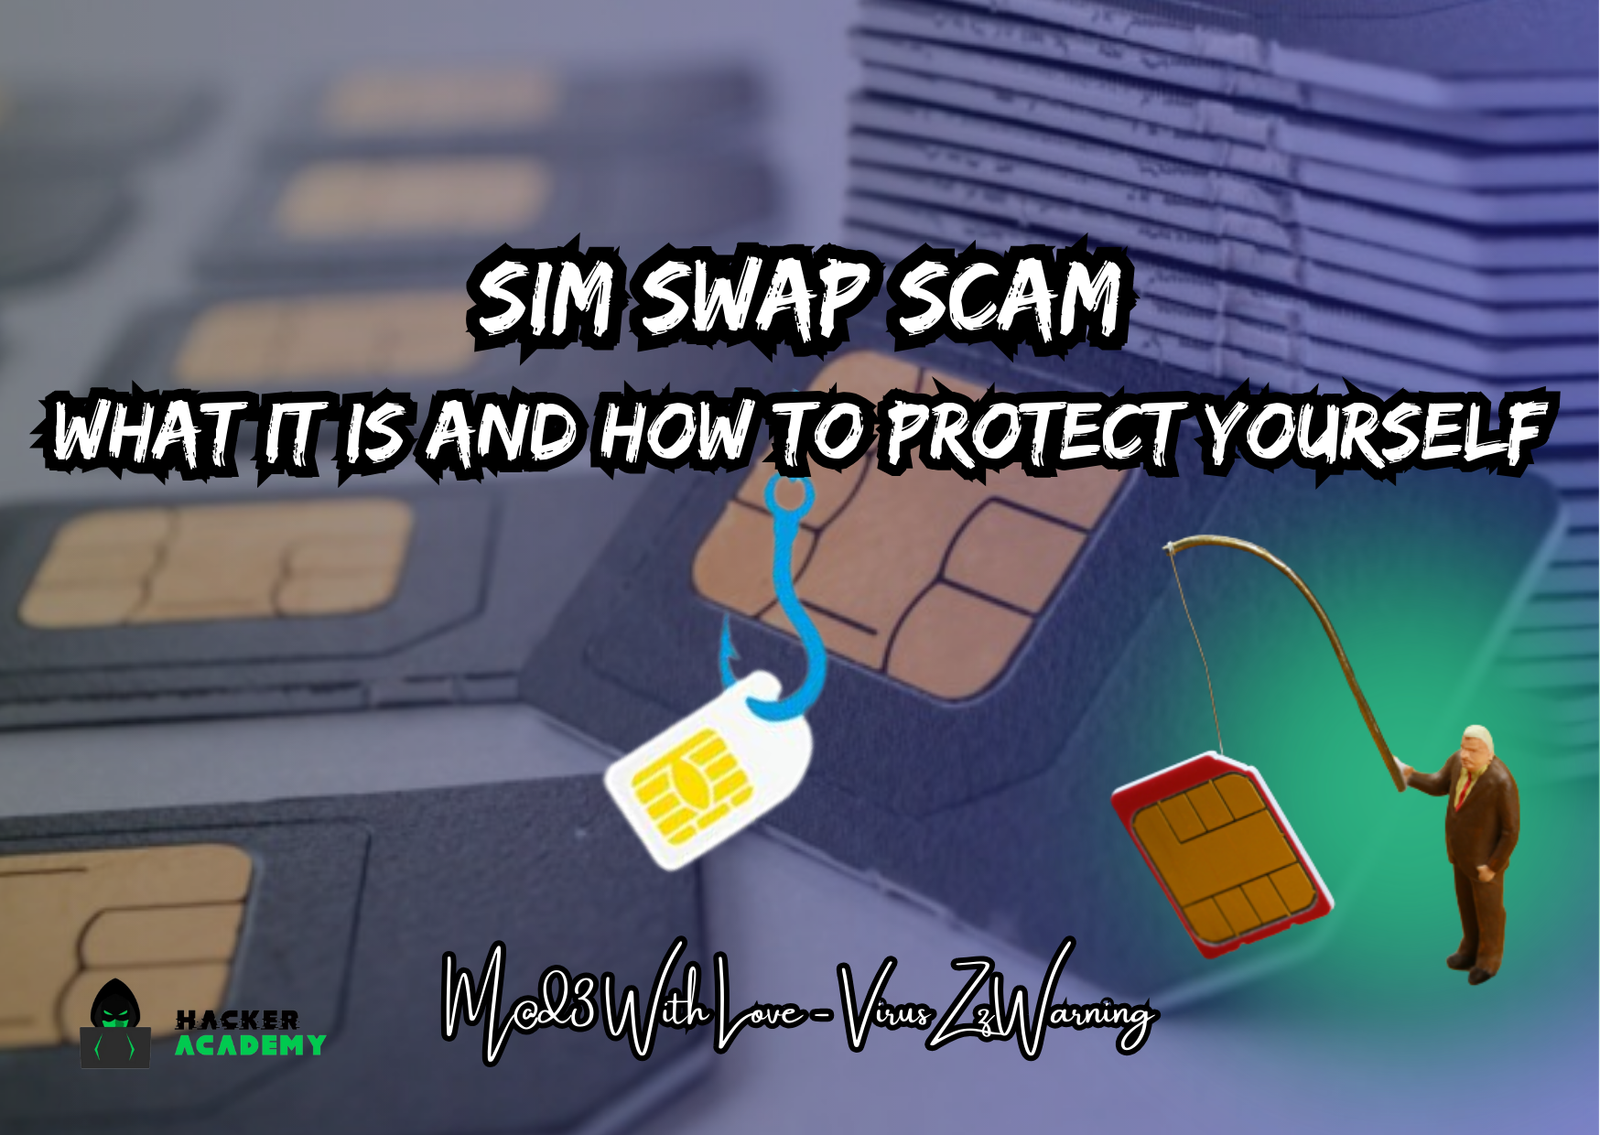 SIM Swap Scam: What it is and How to Protect Yourself